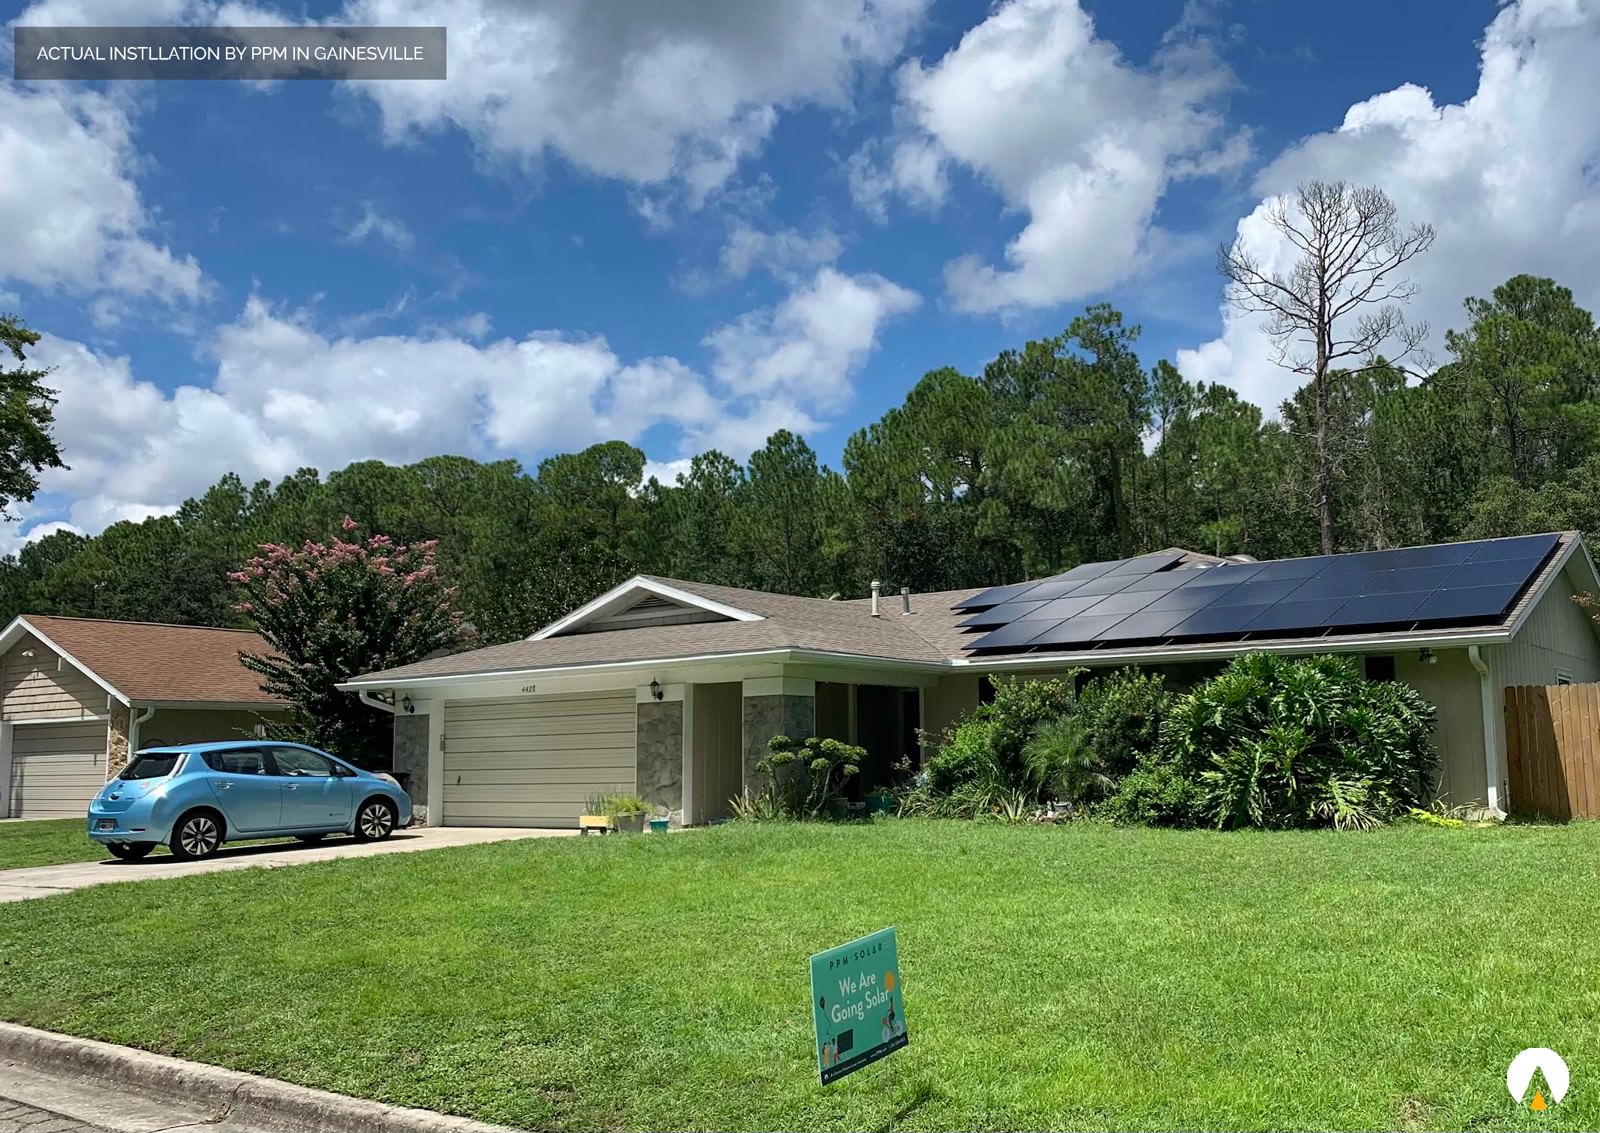 residential solar system in Gainesville with PPM yard sign